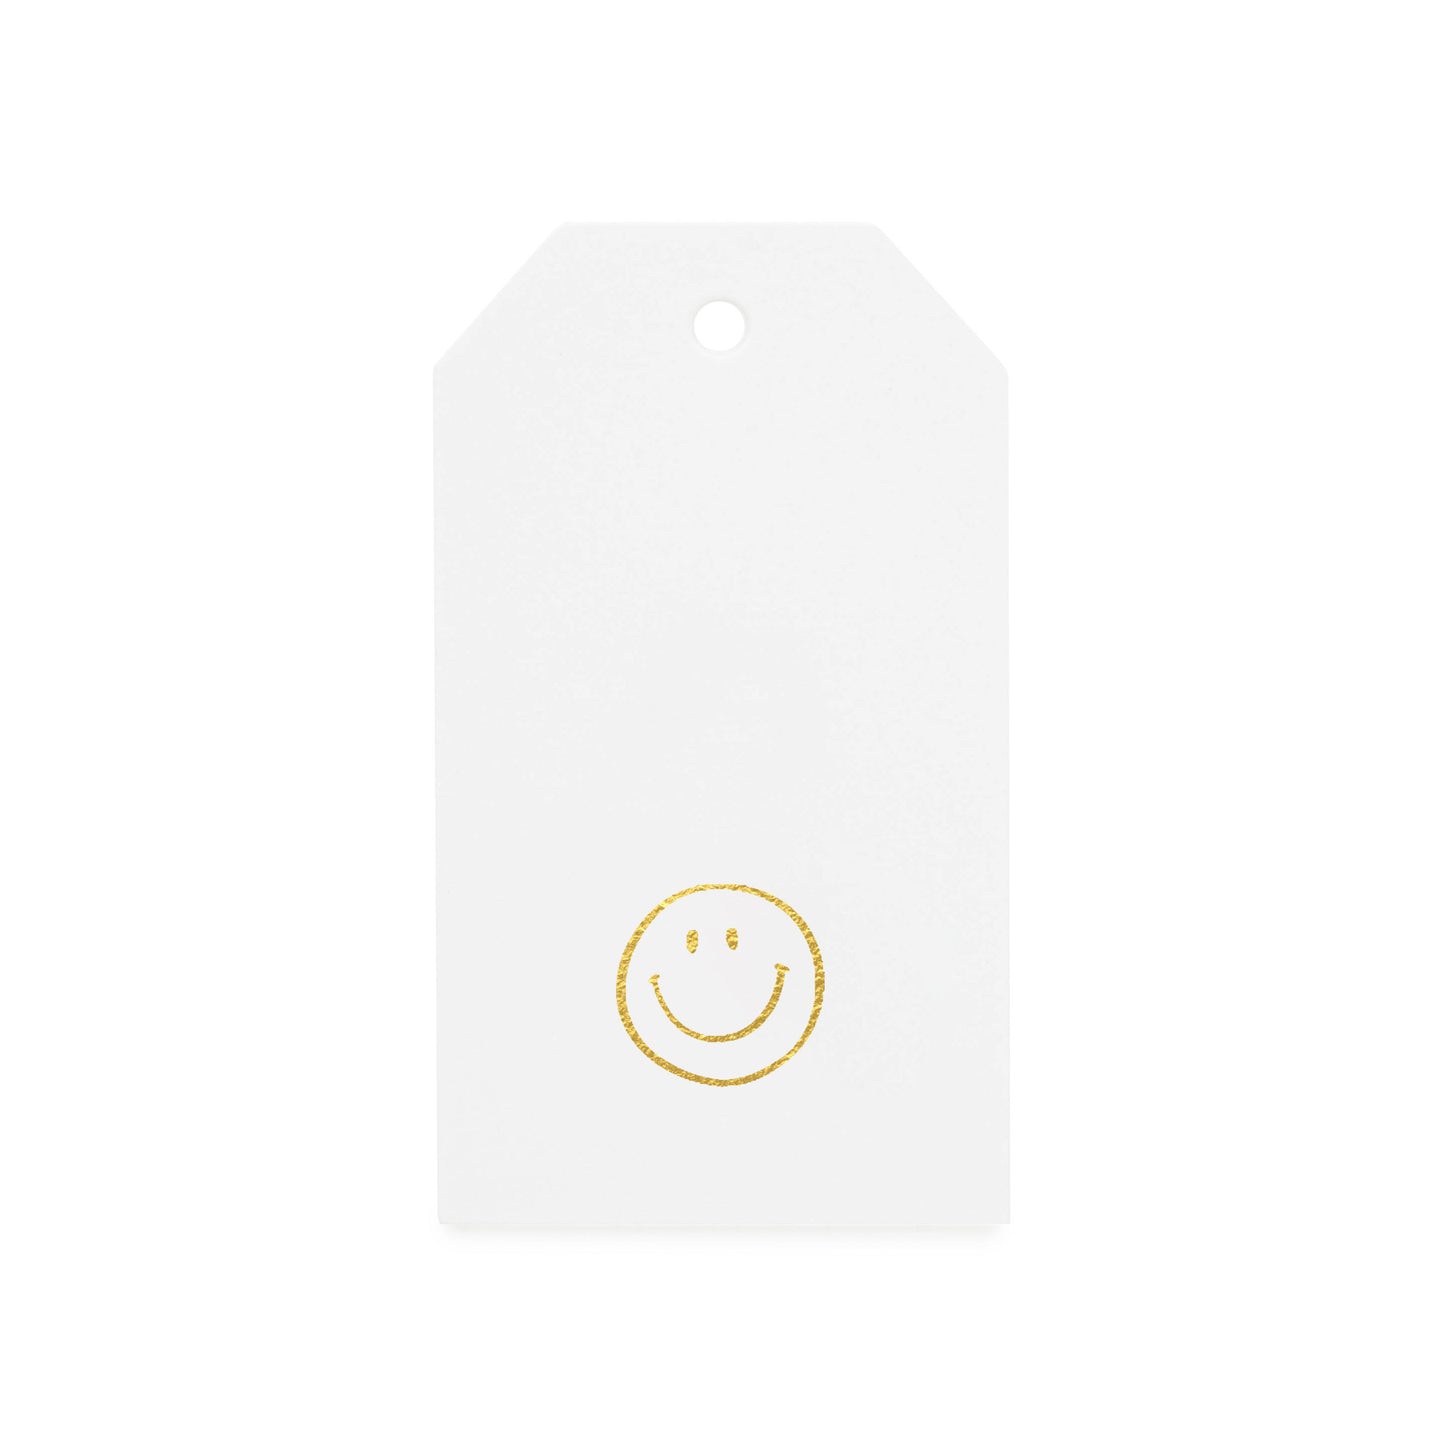 white gift tag with gold foil smiley face